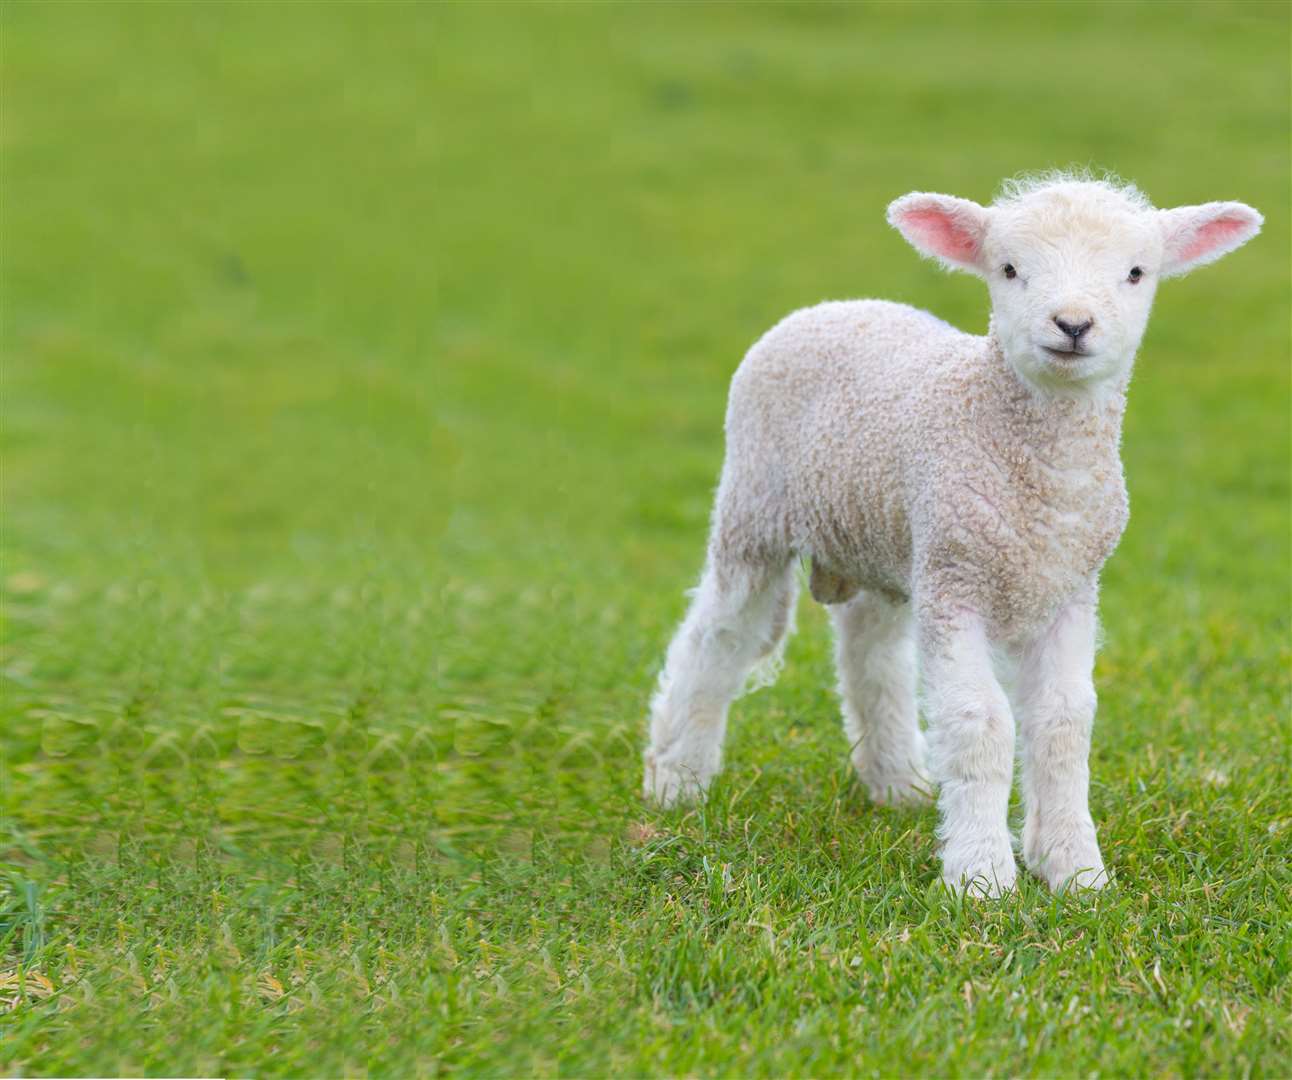 Take your family to a lambing event in Kent